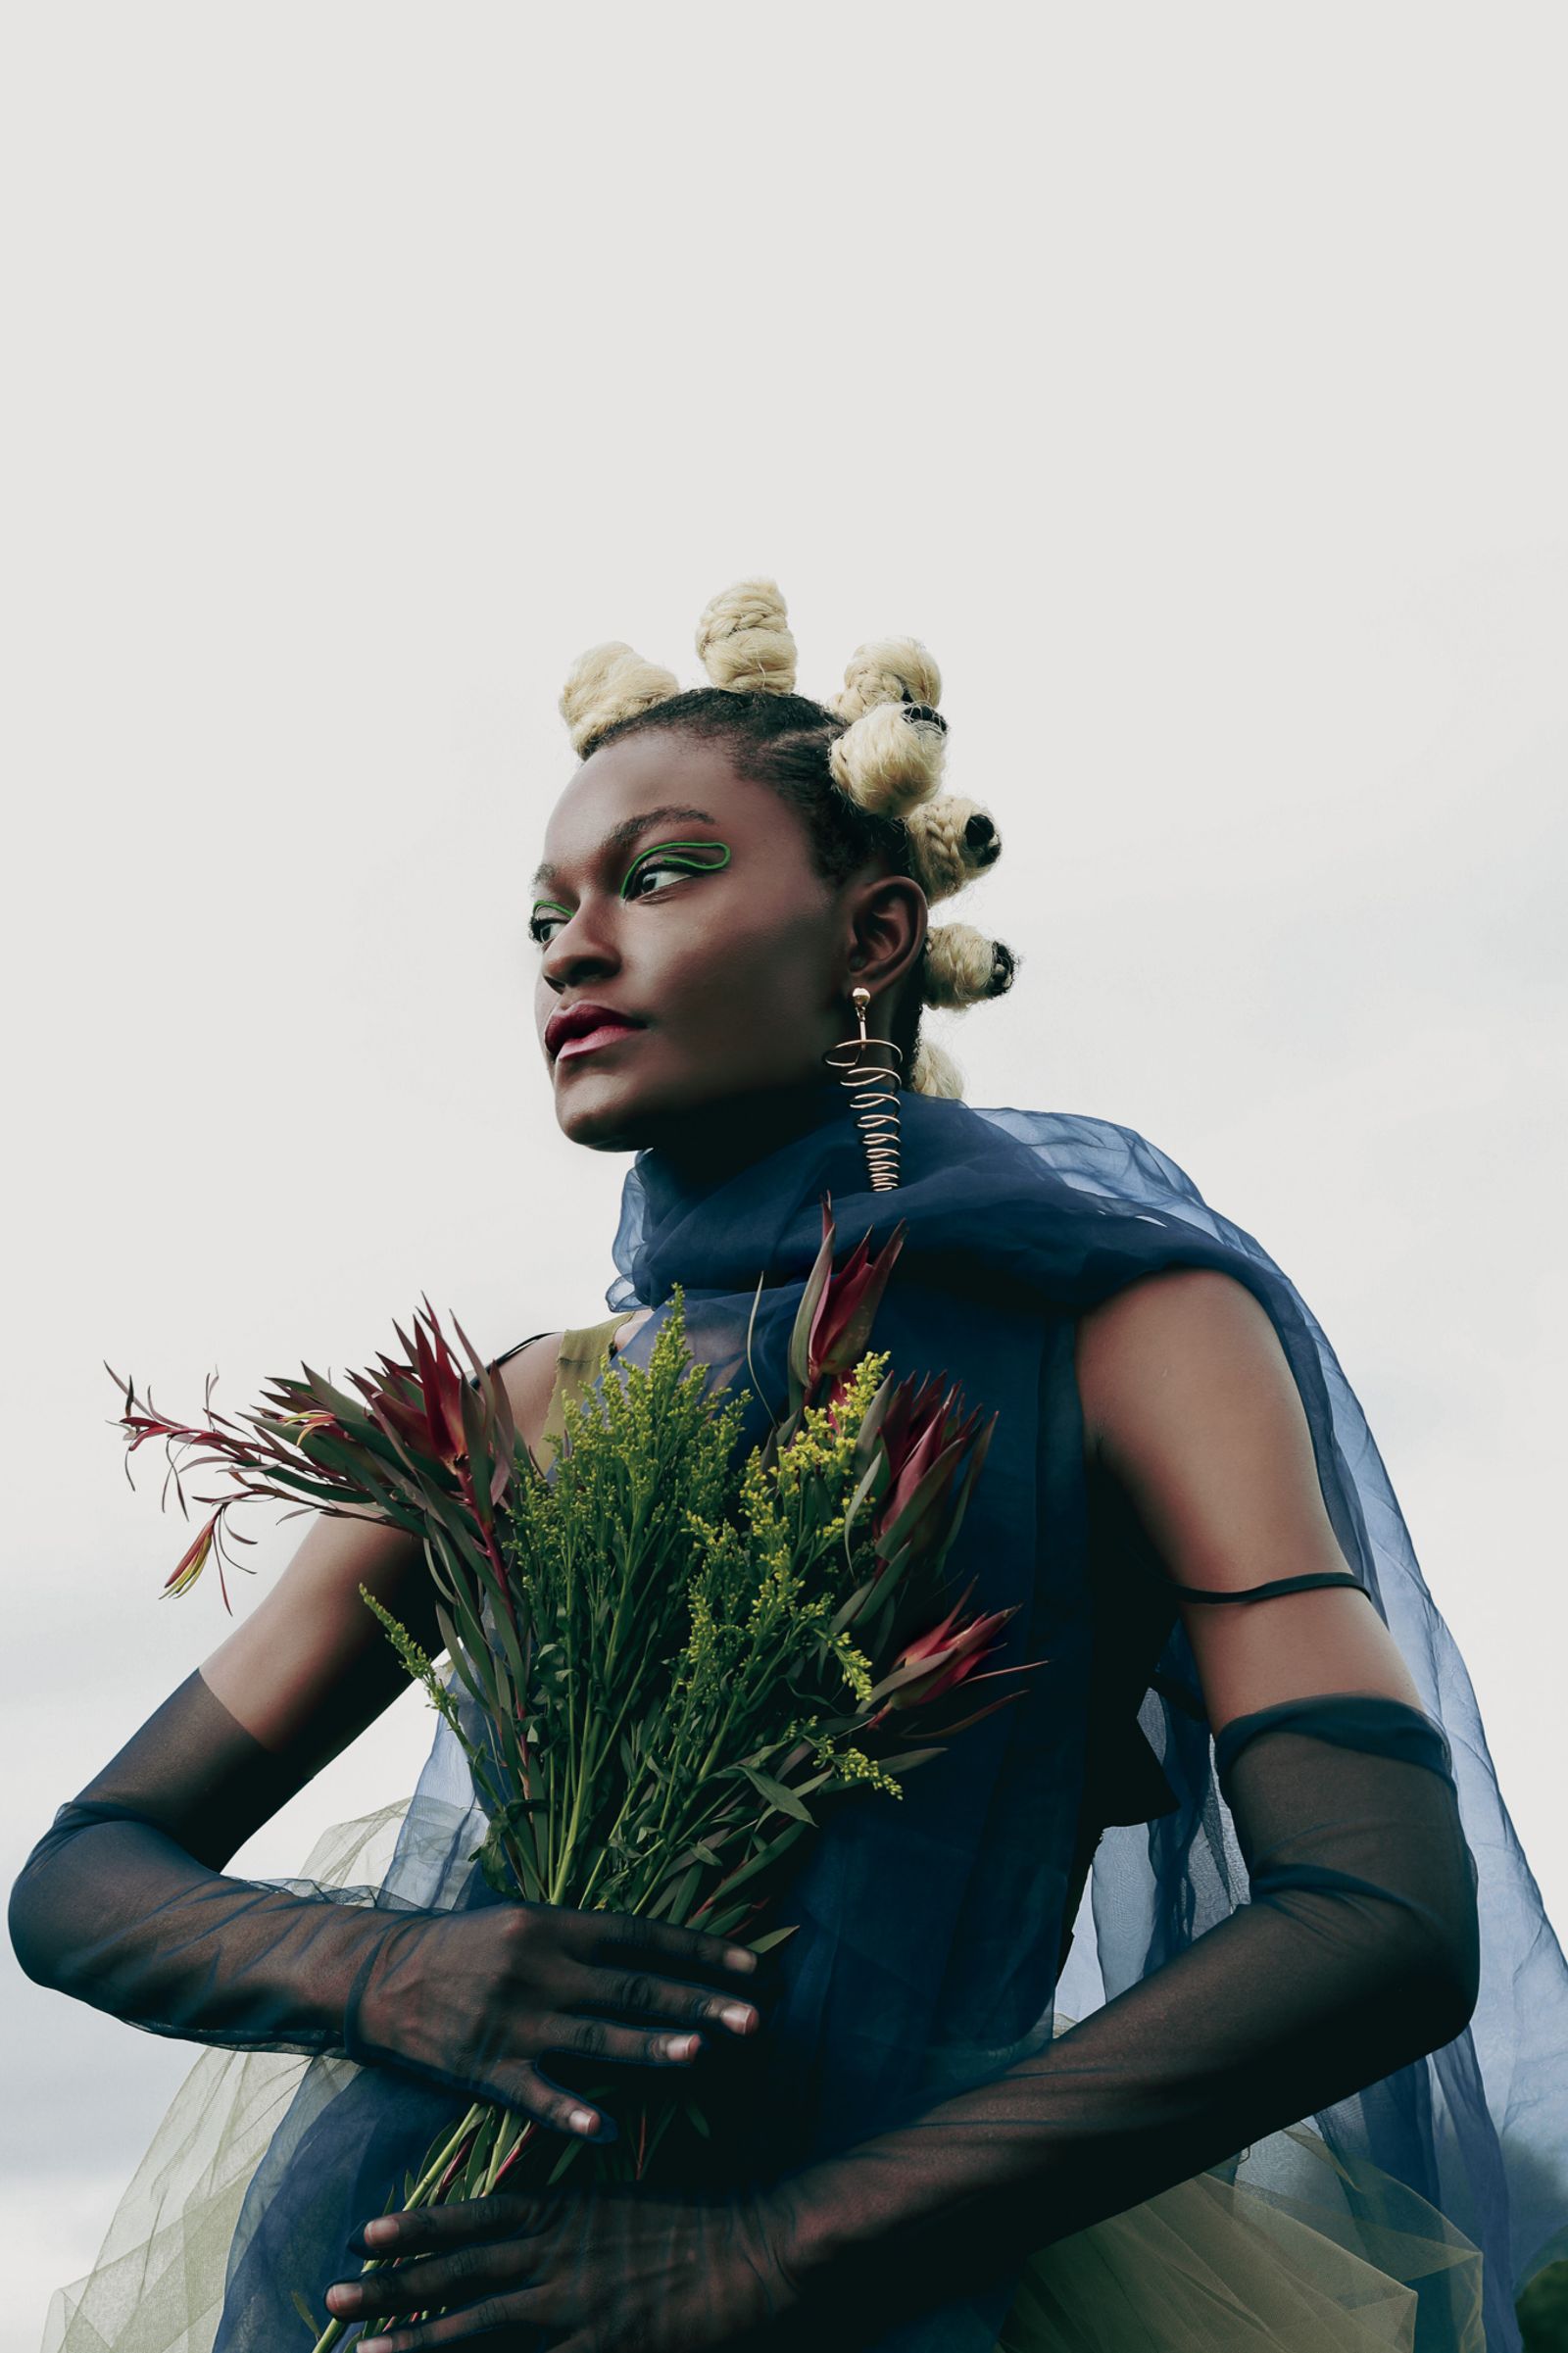 © Ozodi Onyeabor - "Soul in Bloom" - from "Soul Dressing" for Beau Monde Society